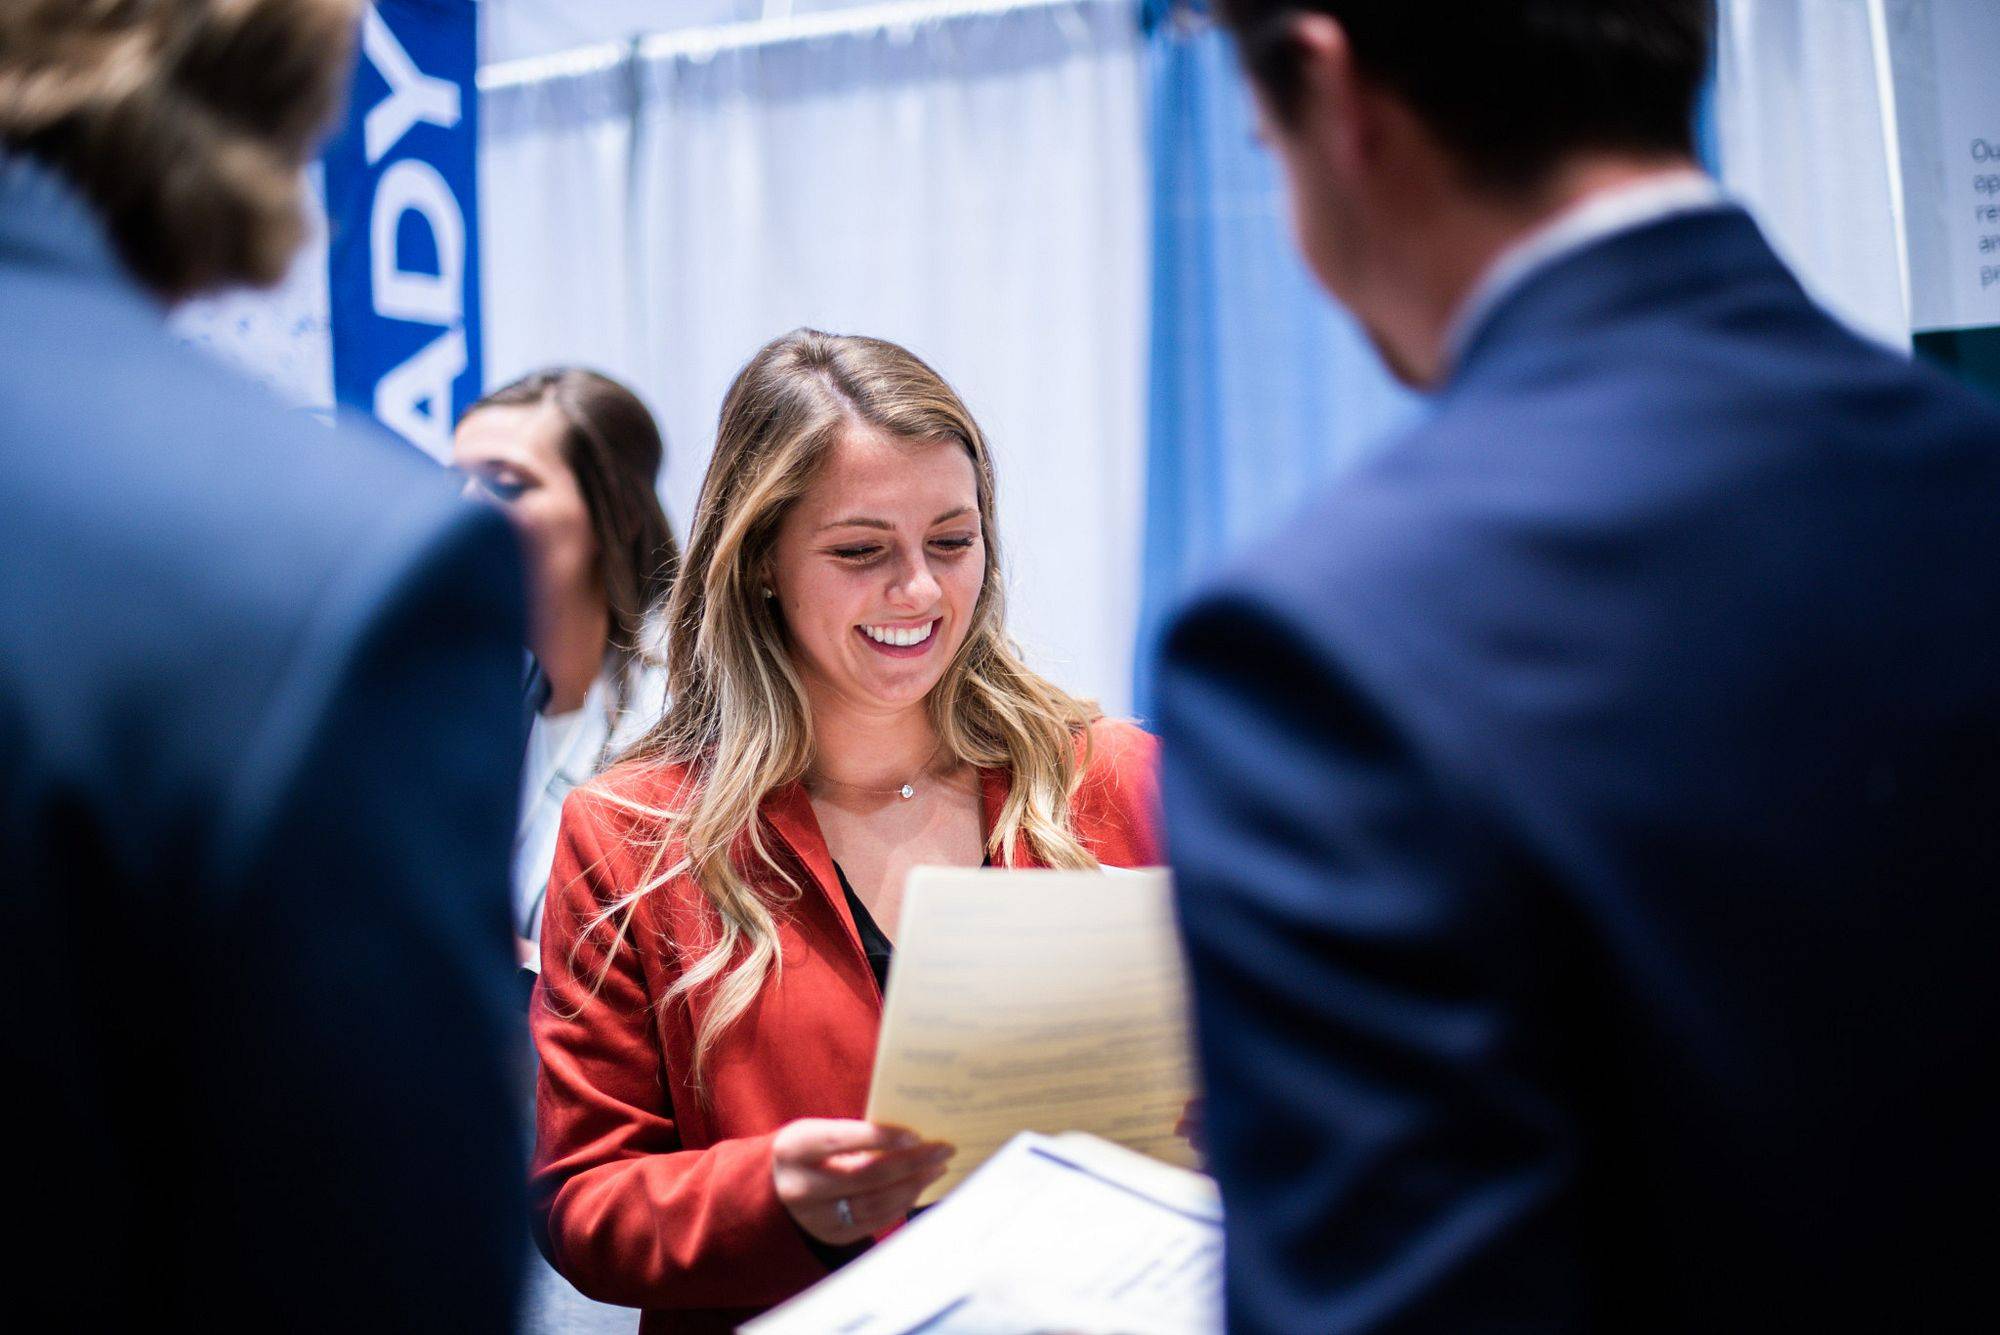 A student speaks with an employer at the GVSU Career Fair